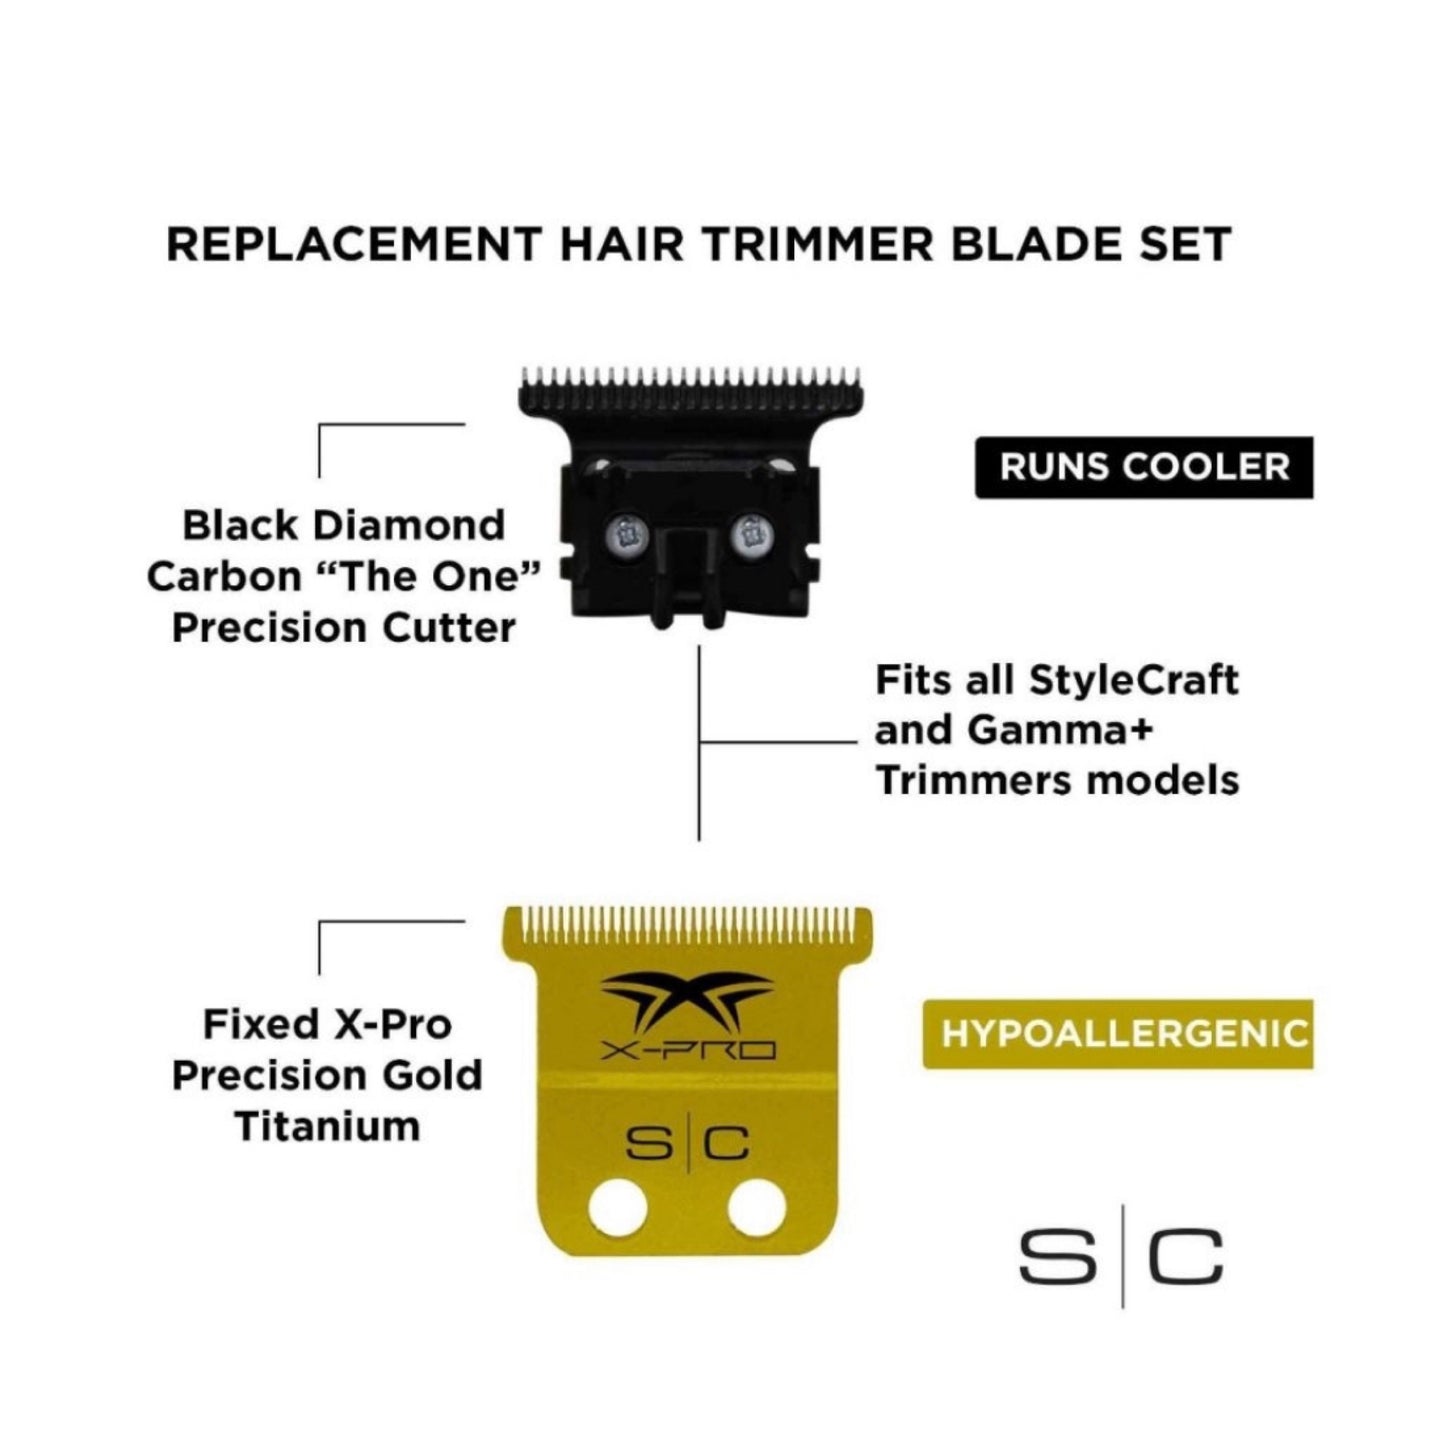 StyleCraft Fixed X-Pro Precision Gold Titanium Trimmer Blade with DLC The One Precision Deep Tooth Cutter